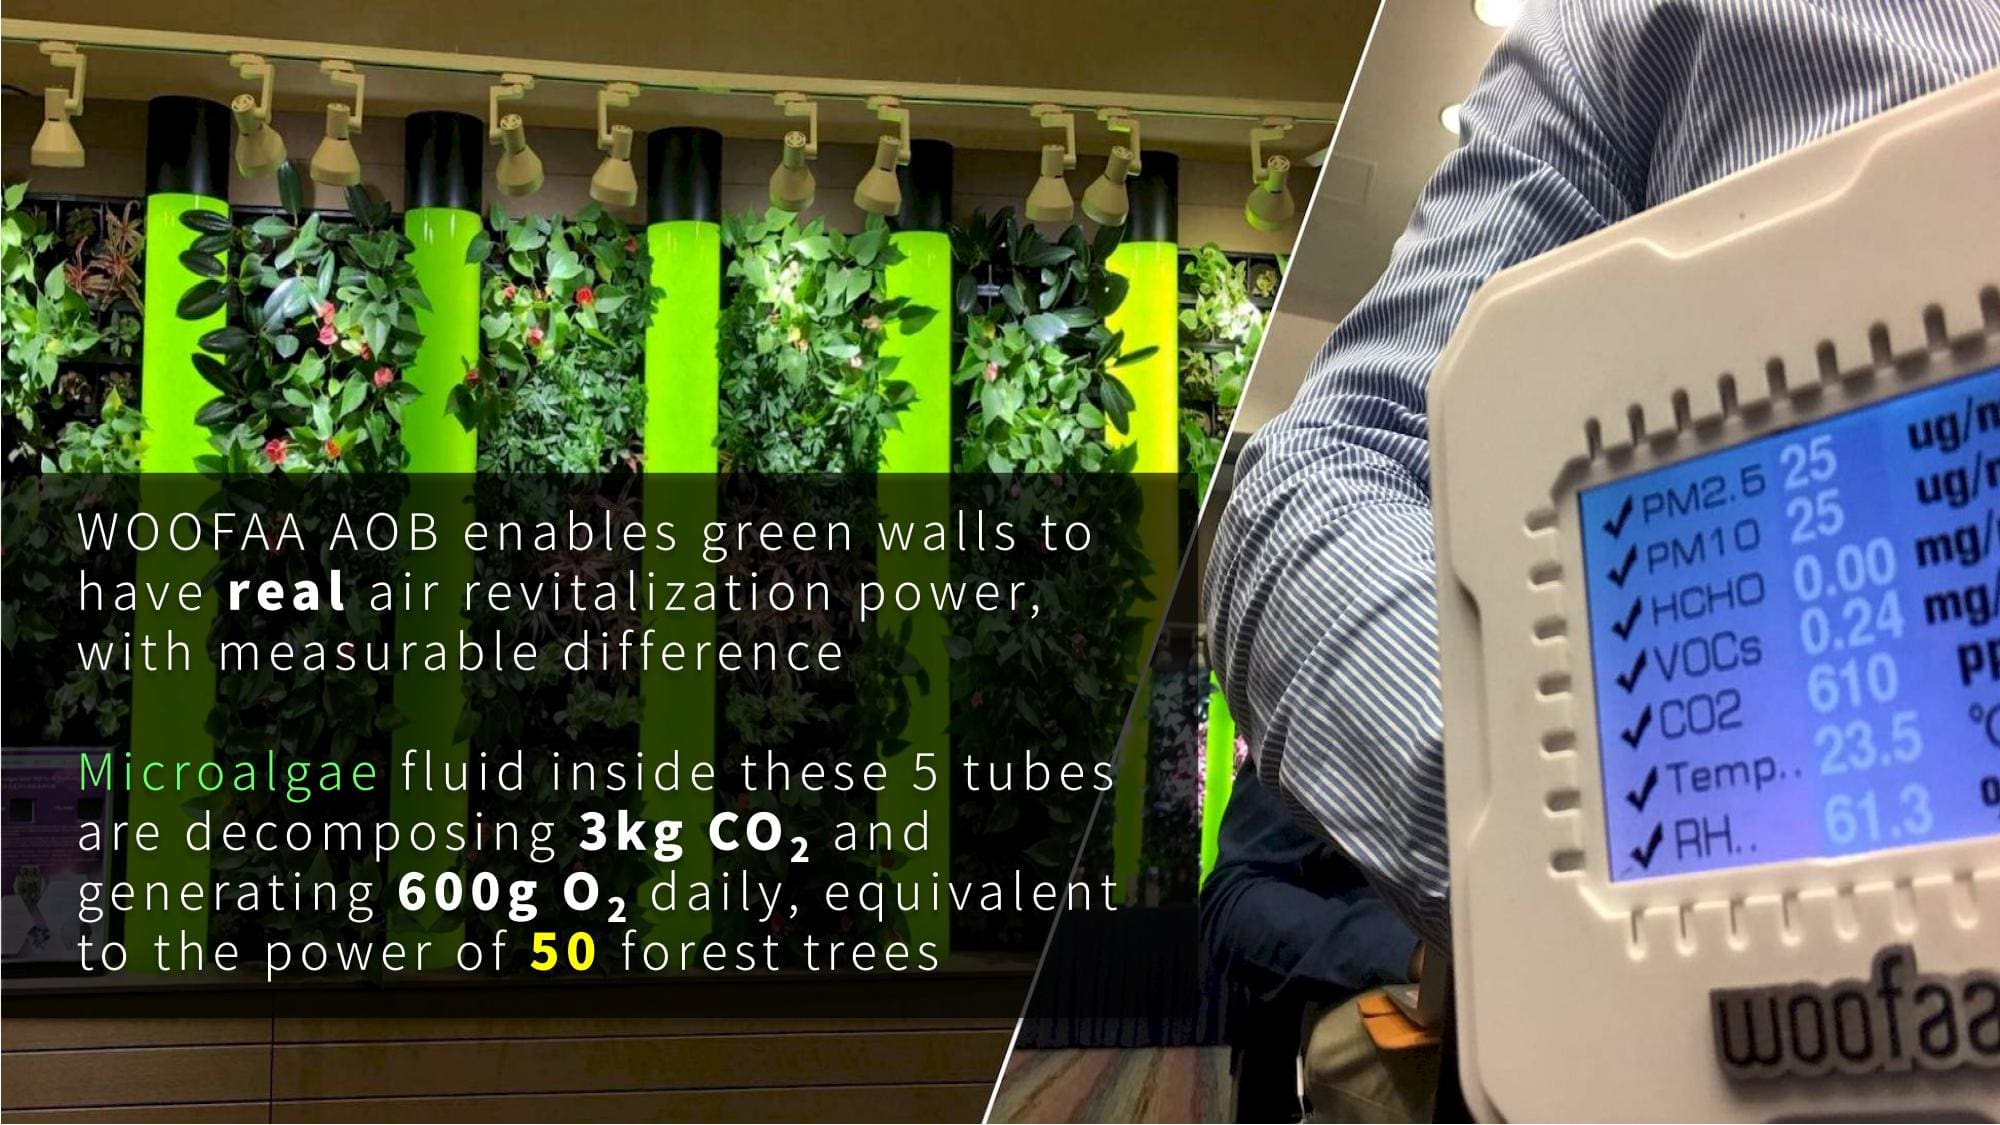 WOOFAA AOB (Algal Oxygen Bar) Cabinet Brings Forest Air to City